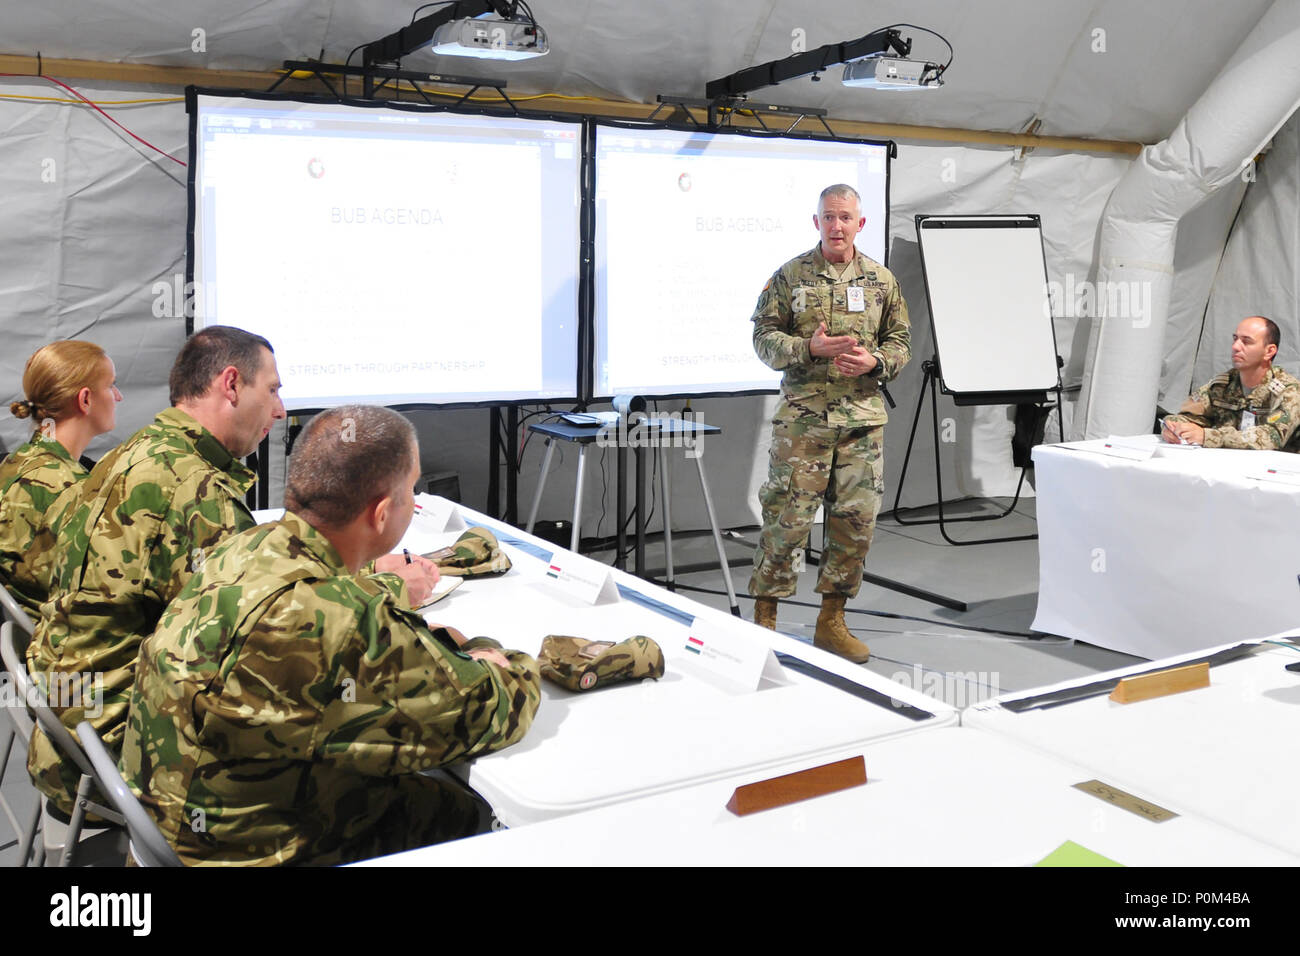 Col. Guy Reedy, chief of staff, 184th Sustainment Command, briefs allied partners on the commands operations during a recent visit to its Tactical Operations Center 4 Jun, Powidz, Poland. 184th SC provides forward mission command overseeing logistics and movements during Saber Strike 18. Host and participating nations benefit from cooperative training opportunities, and we plan to continue these efforts with future Saber Strike exercises. (Mississippi National Guard photo by Staff Sgt. Veronica McNabb, 184th Sustainment Command Public Affairs) Stock Photo